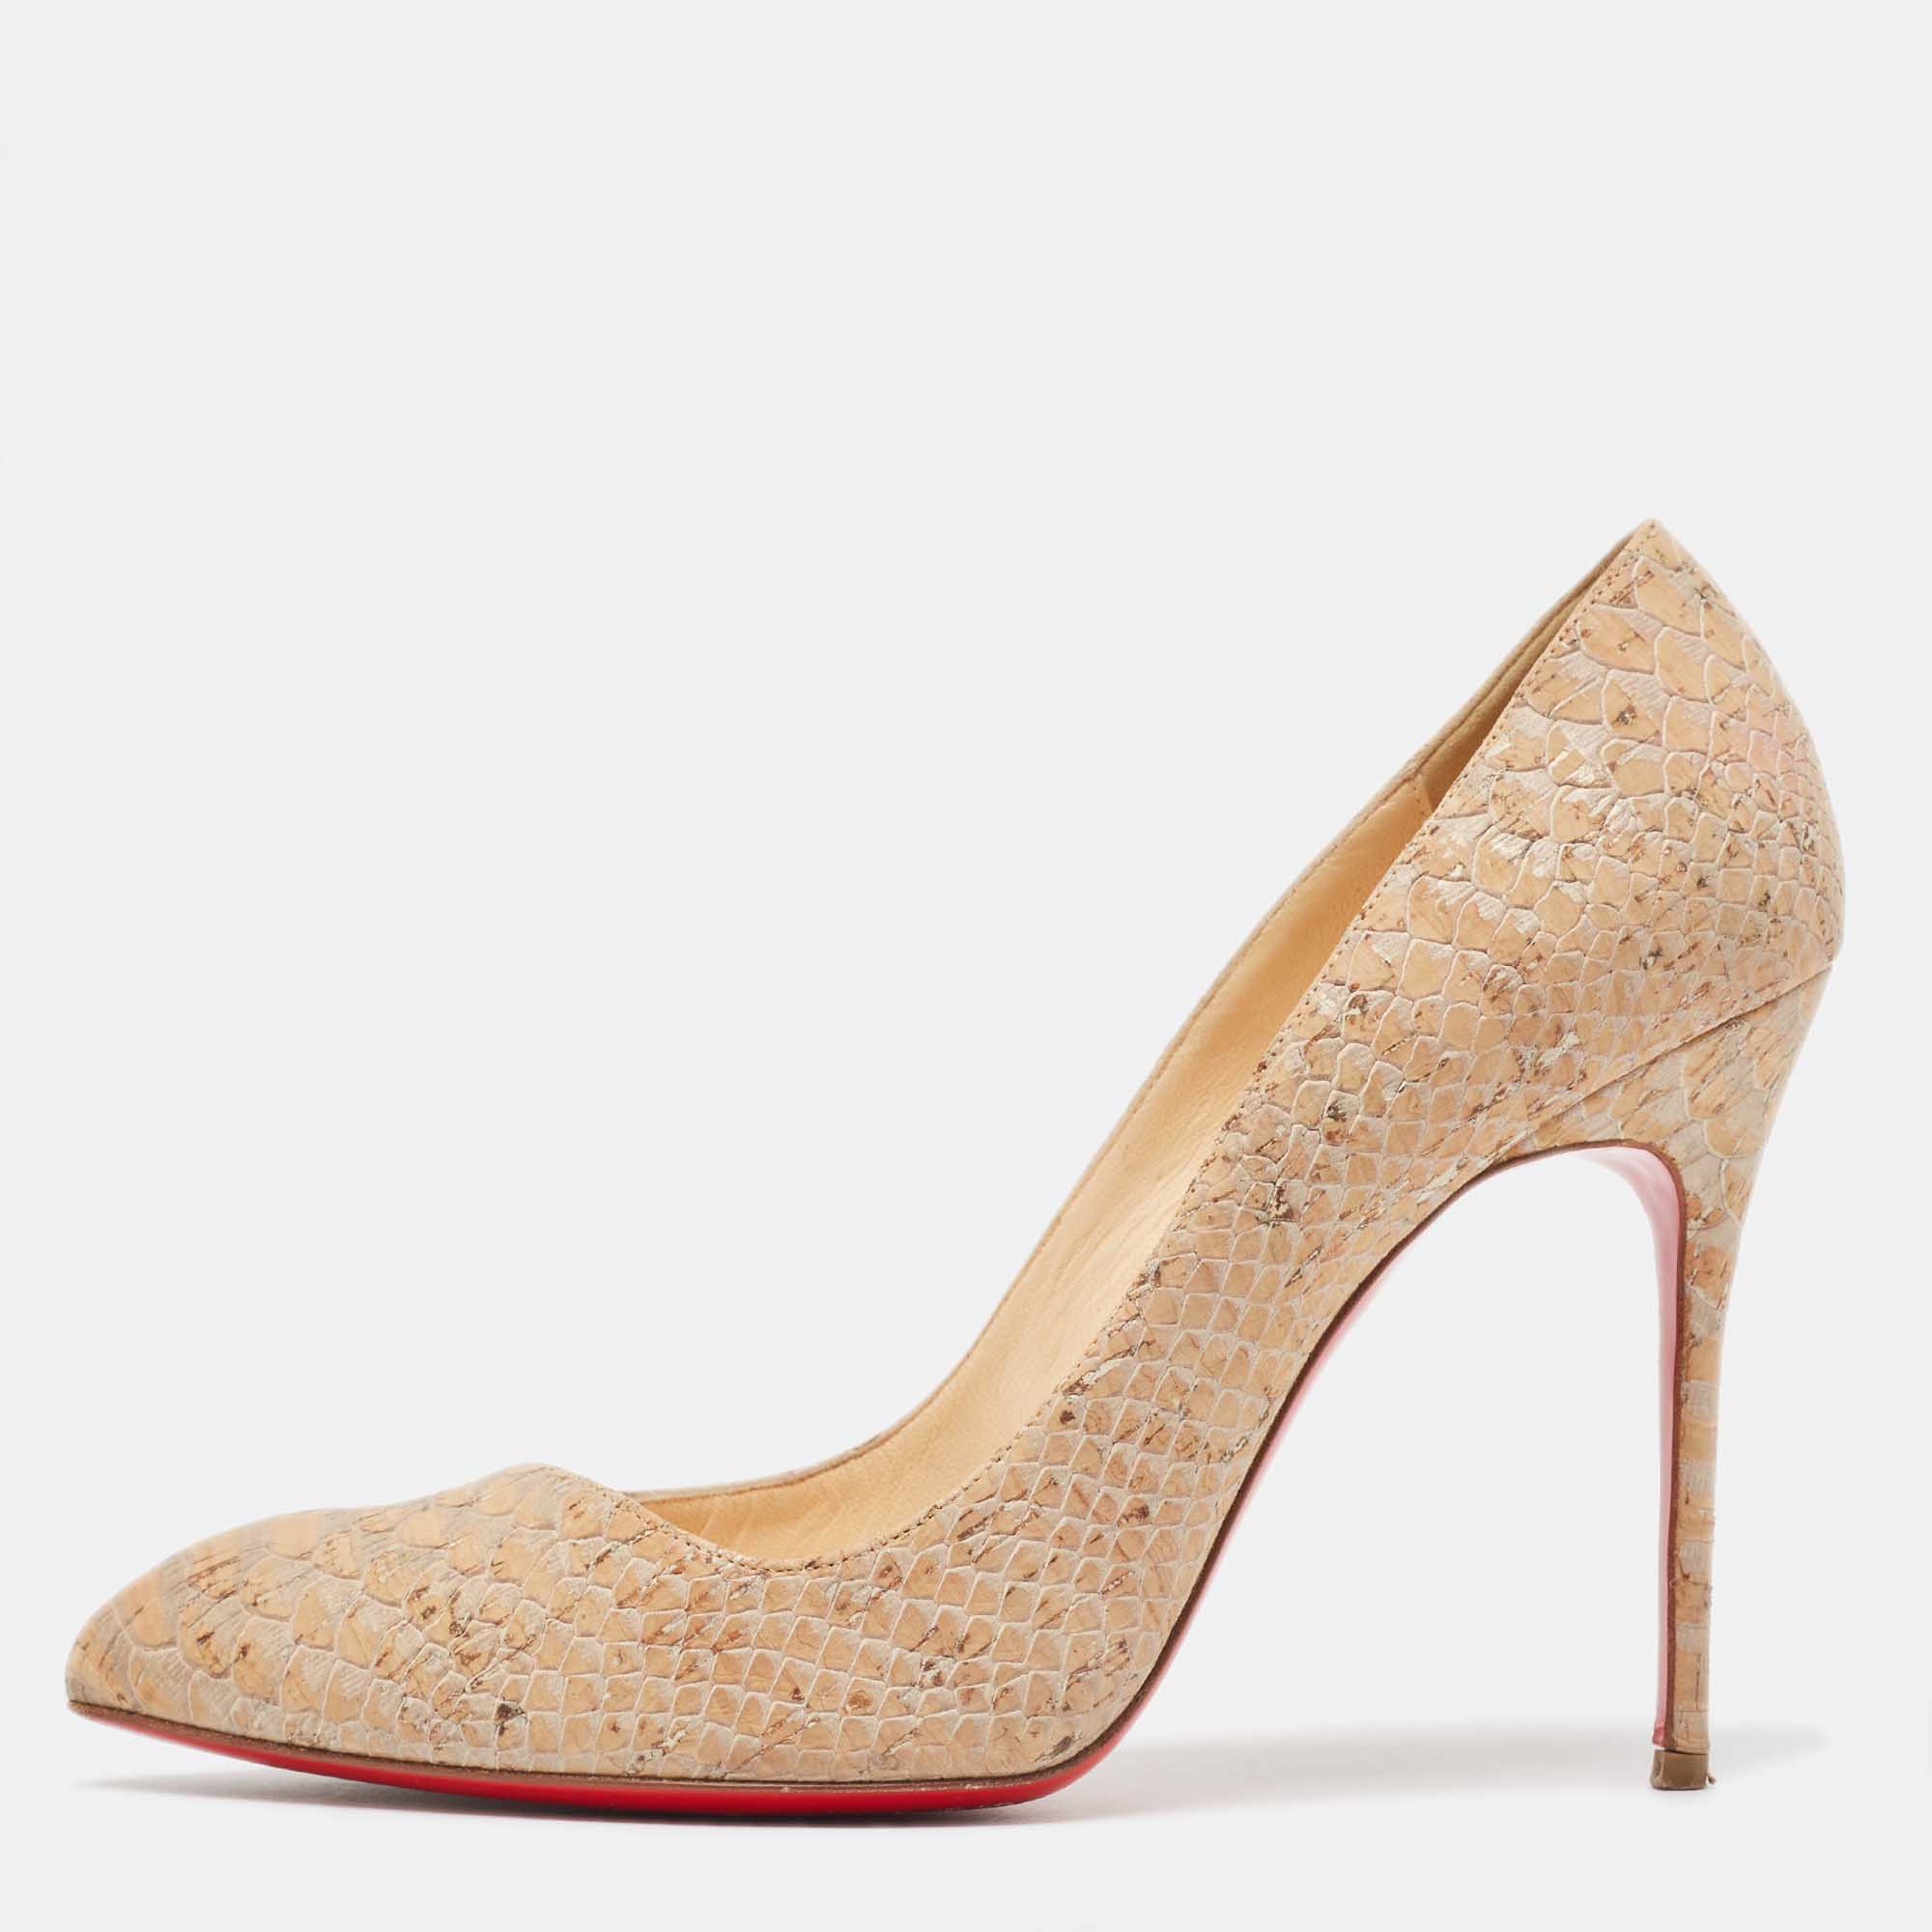 Christian louboutin beige python embossed cork pointed toe pumps size 39